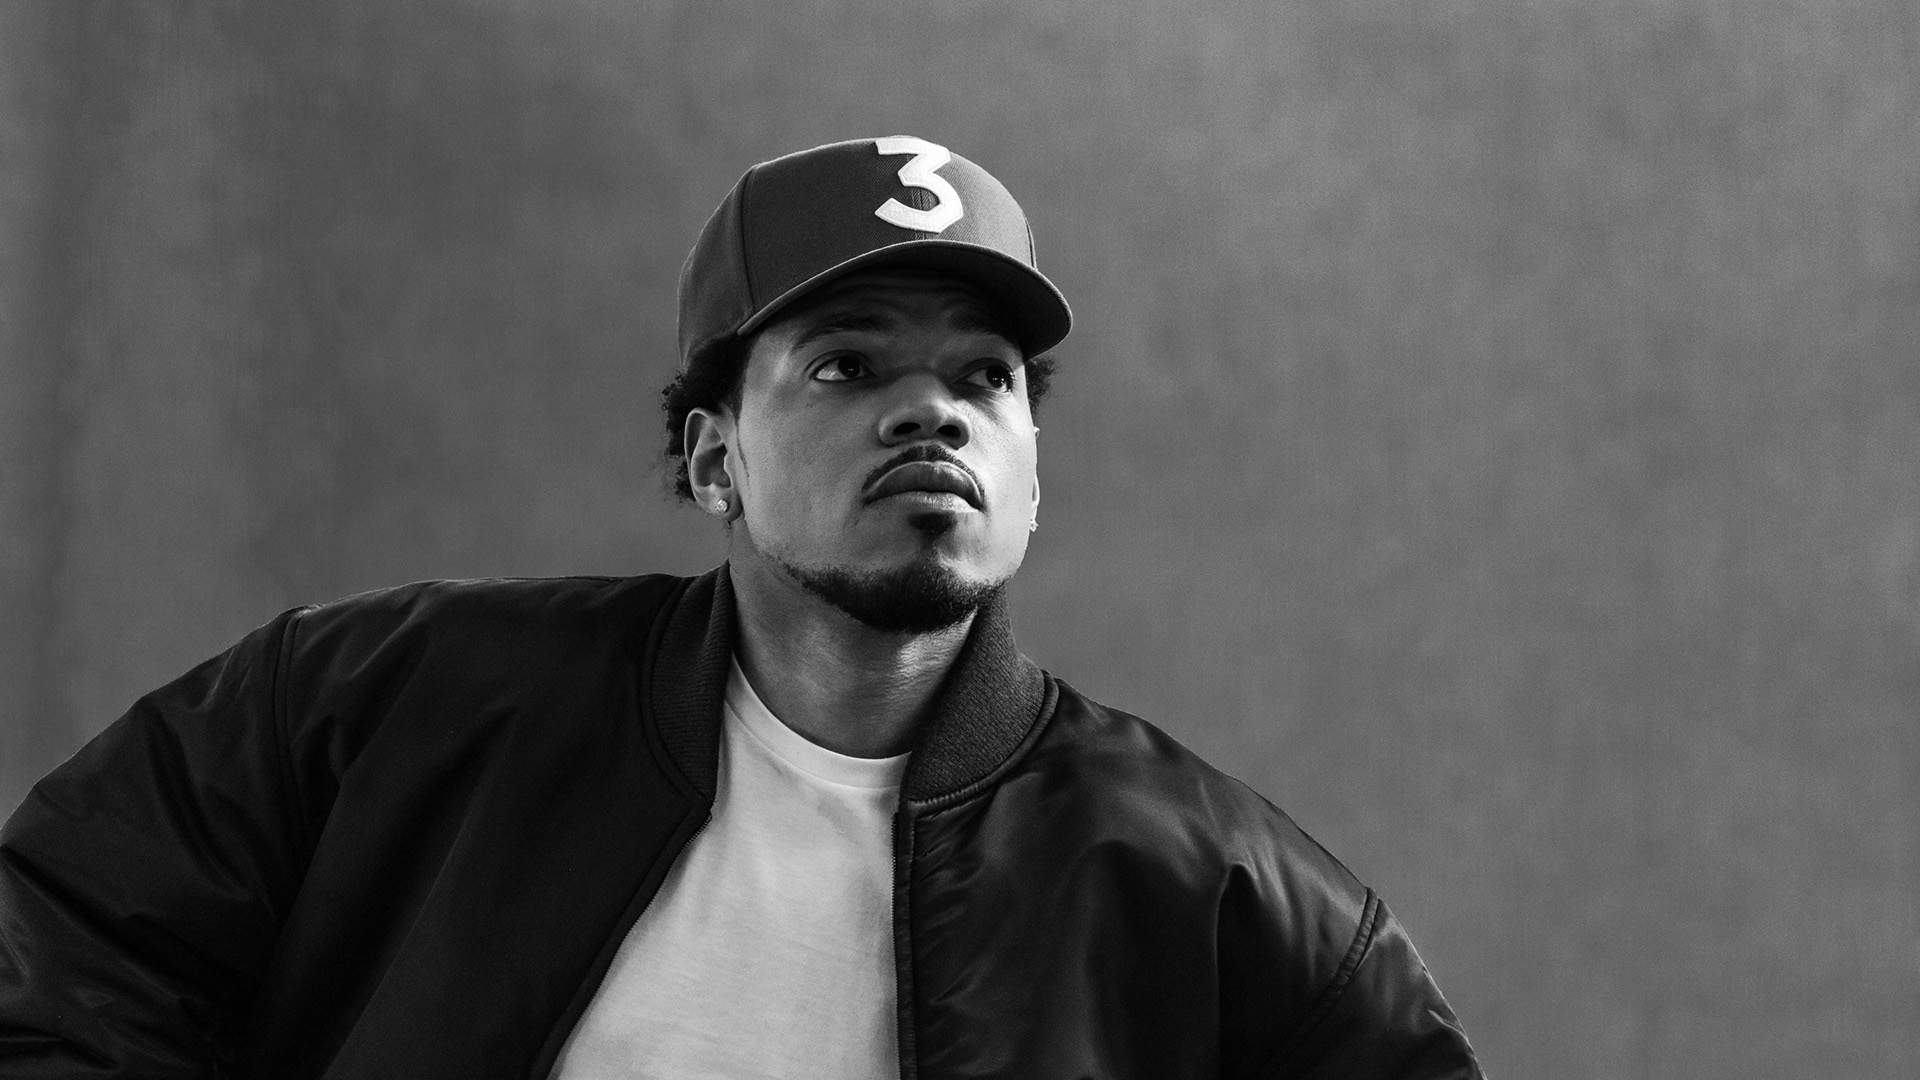 Just In: Chance The Rapper Will Speak at SXSW Sydney to Celebrate 50 Years of Hip Hop